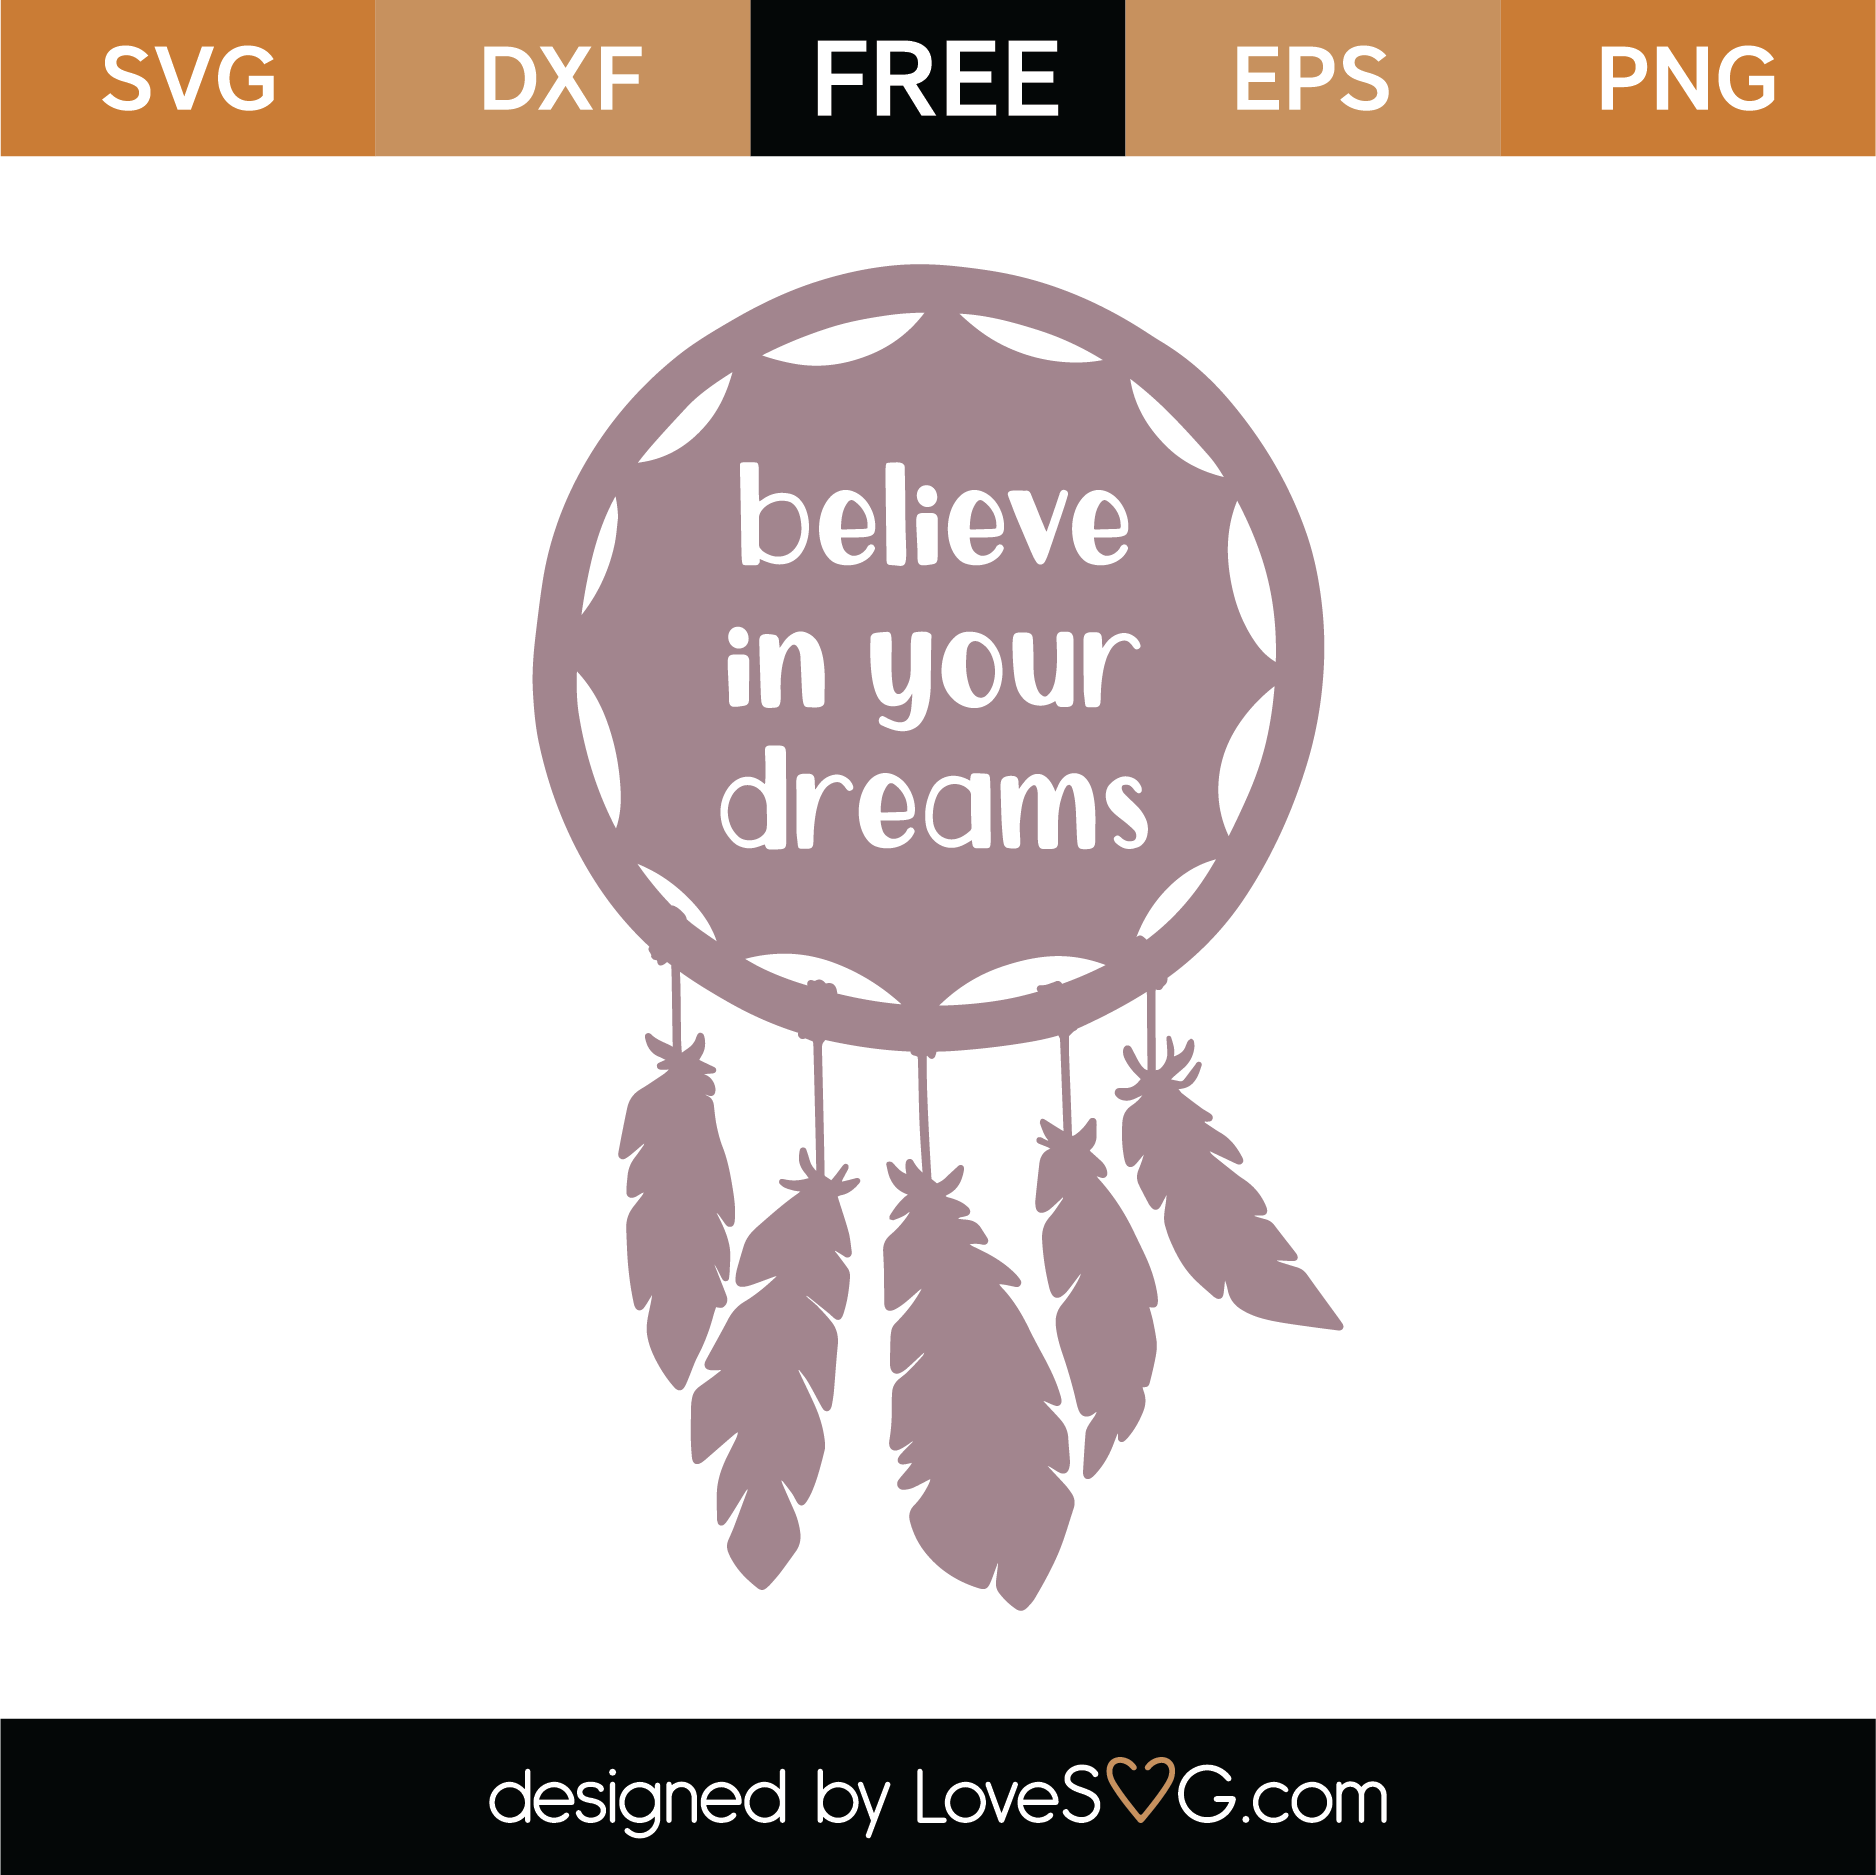 Download Free Believe In Your Dreams SVG Cut File | Lovesvg.com